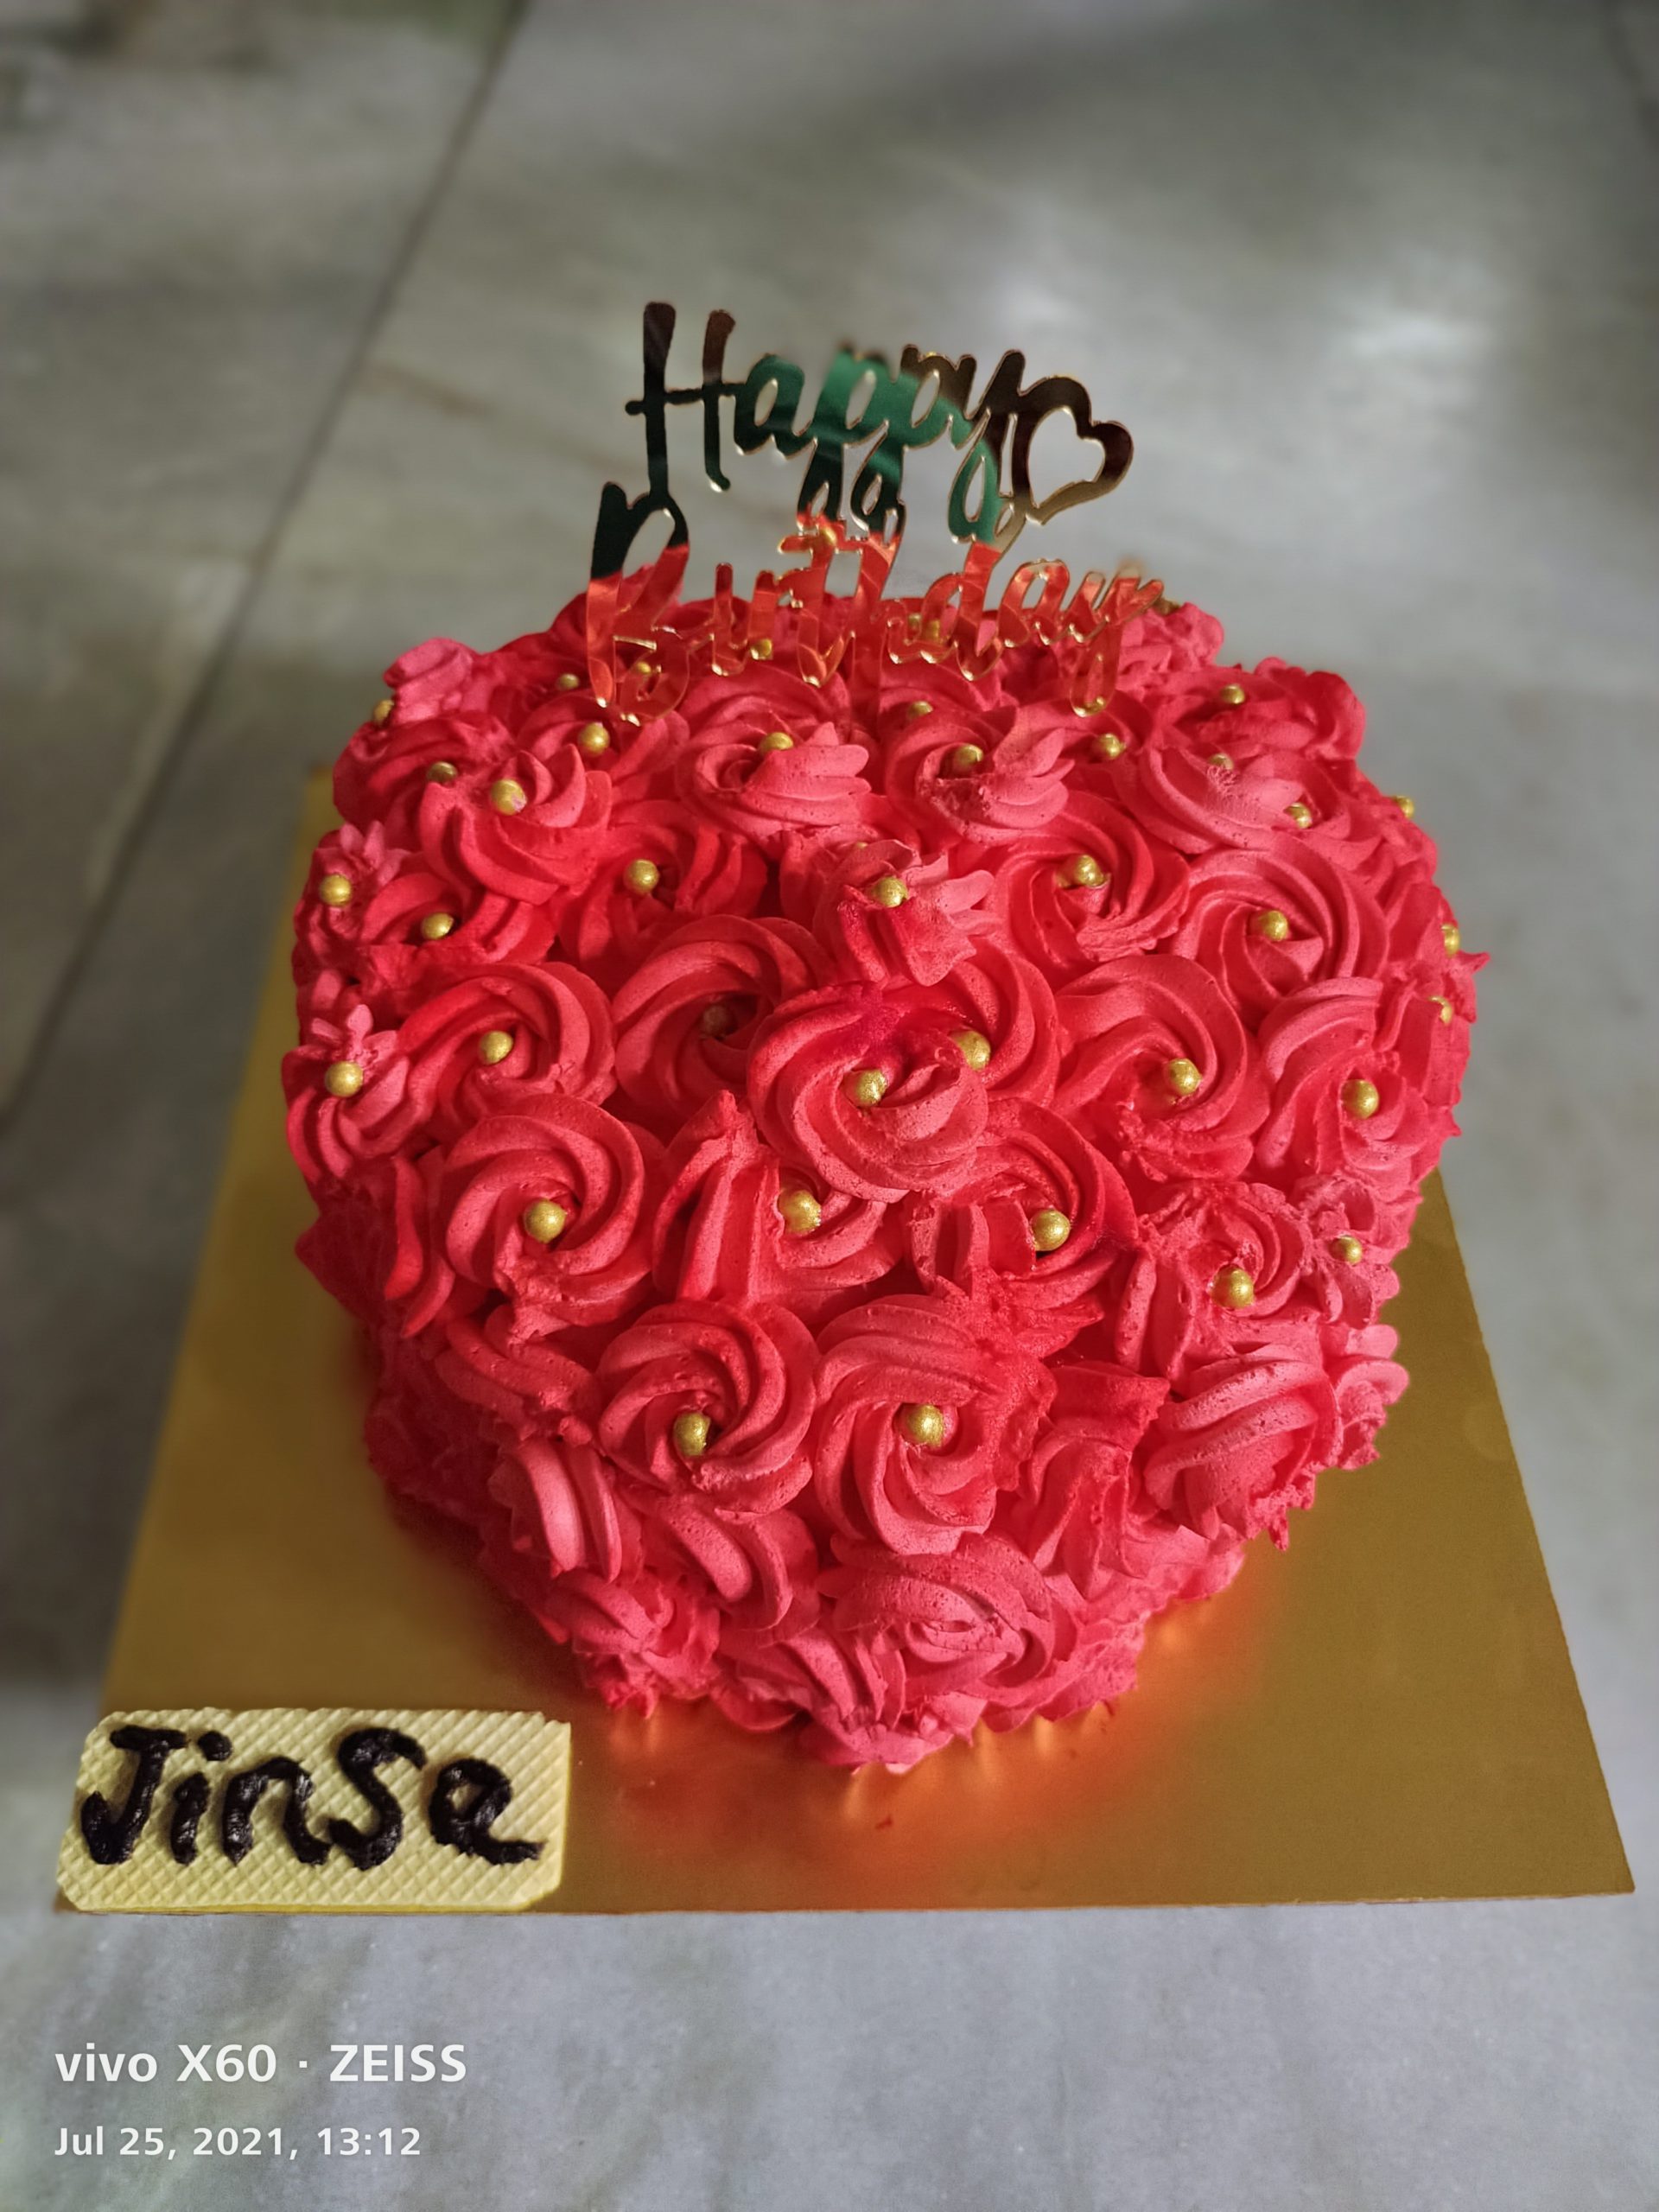 Chocolate Truffle Cake Floral Design Designs, Images, Price Near Me